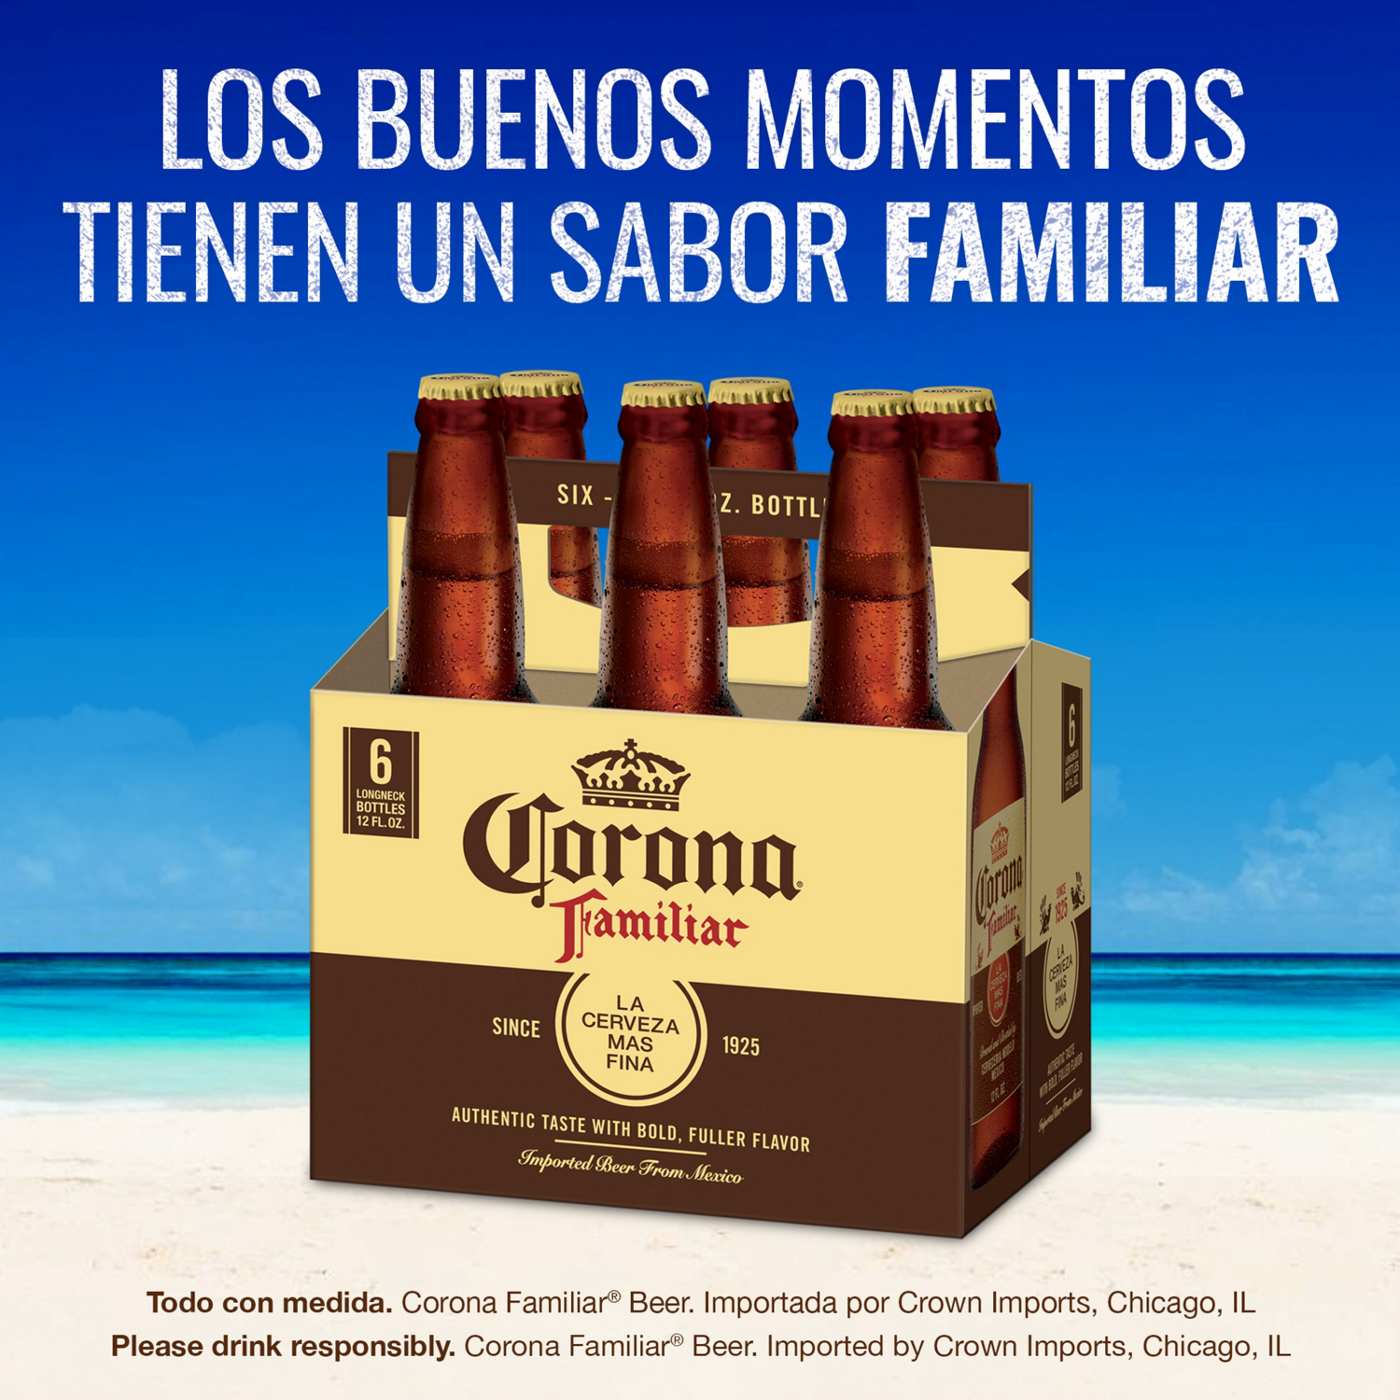 Corona Familiar Mexican Lager Import Beer 12 oz Bottles, 6 pk; image 4 of 10